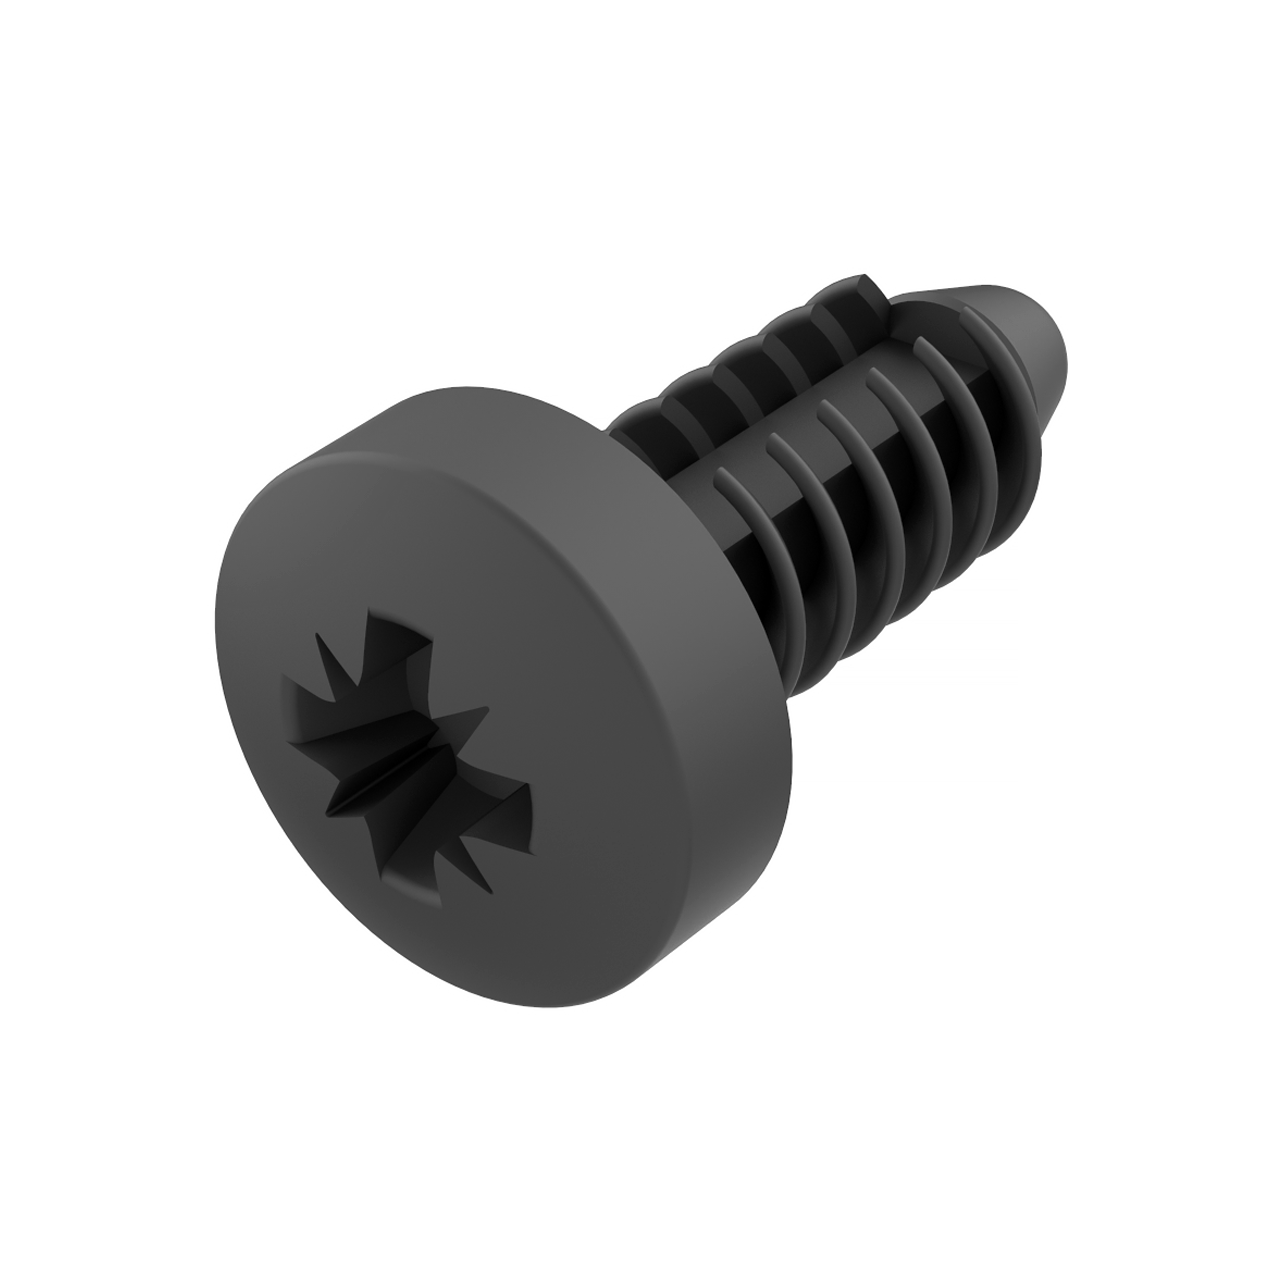 Quick assembly screw for metric thread*